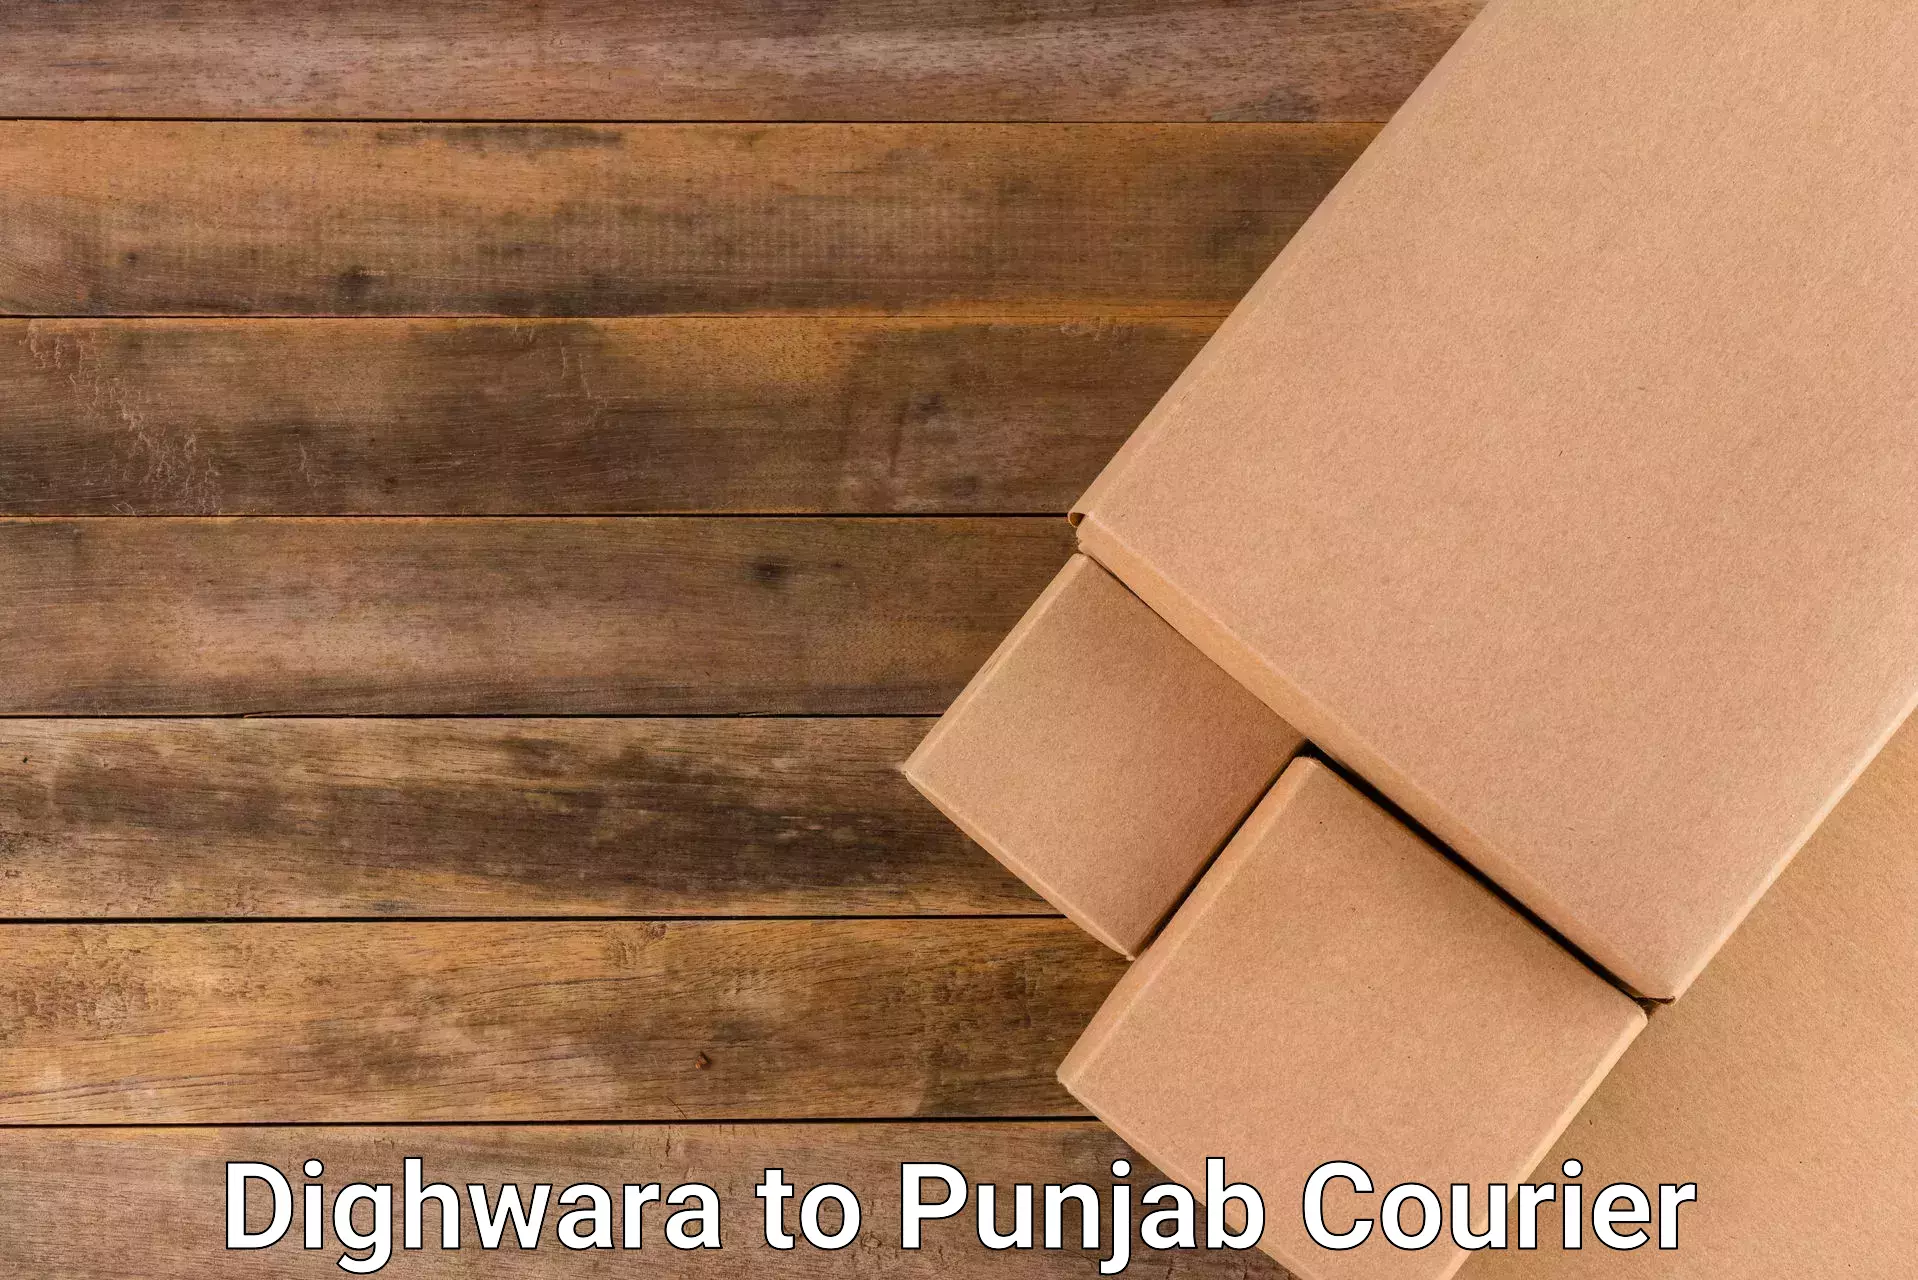 Express delivery solutions in Dighwara to Bathinda